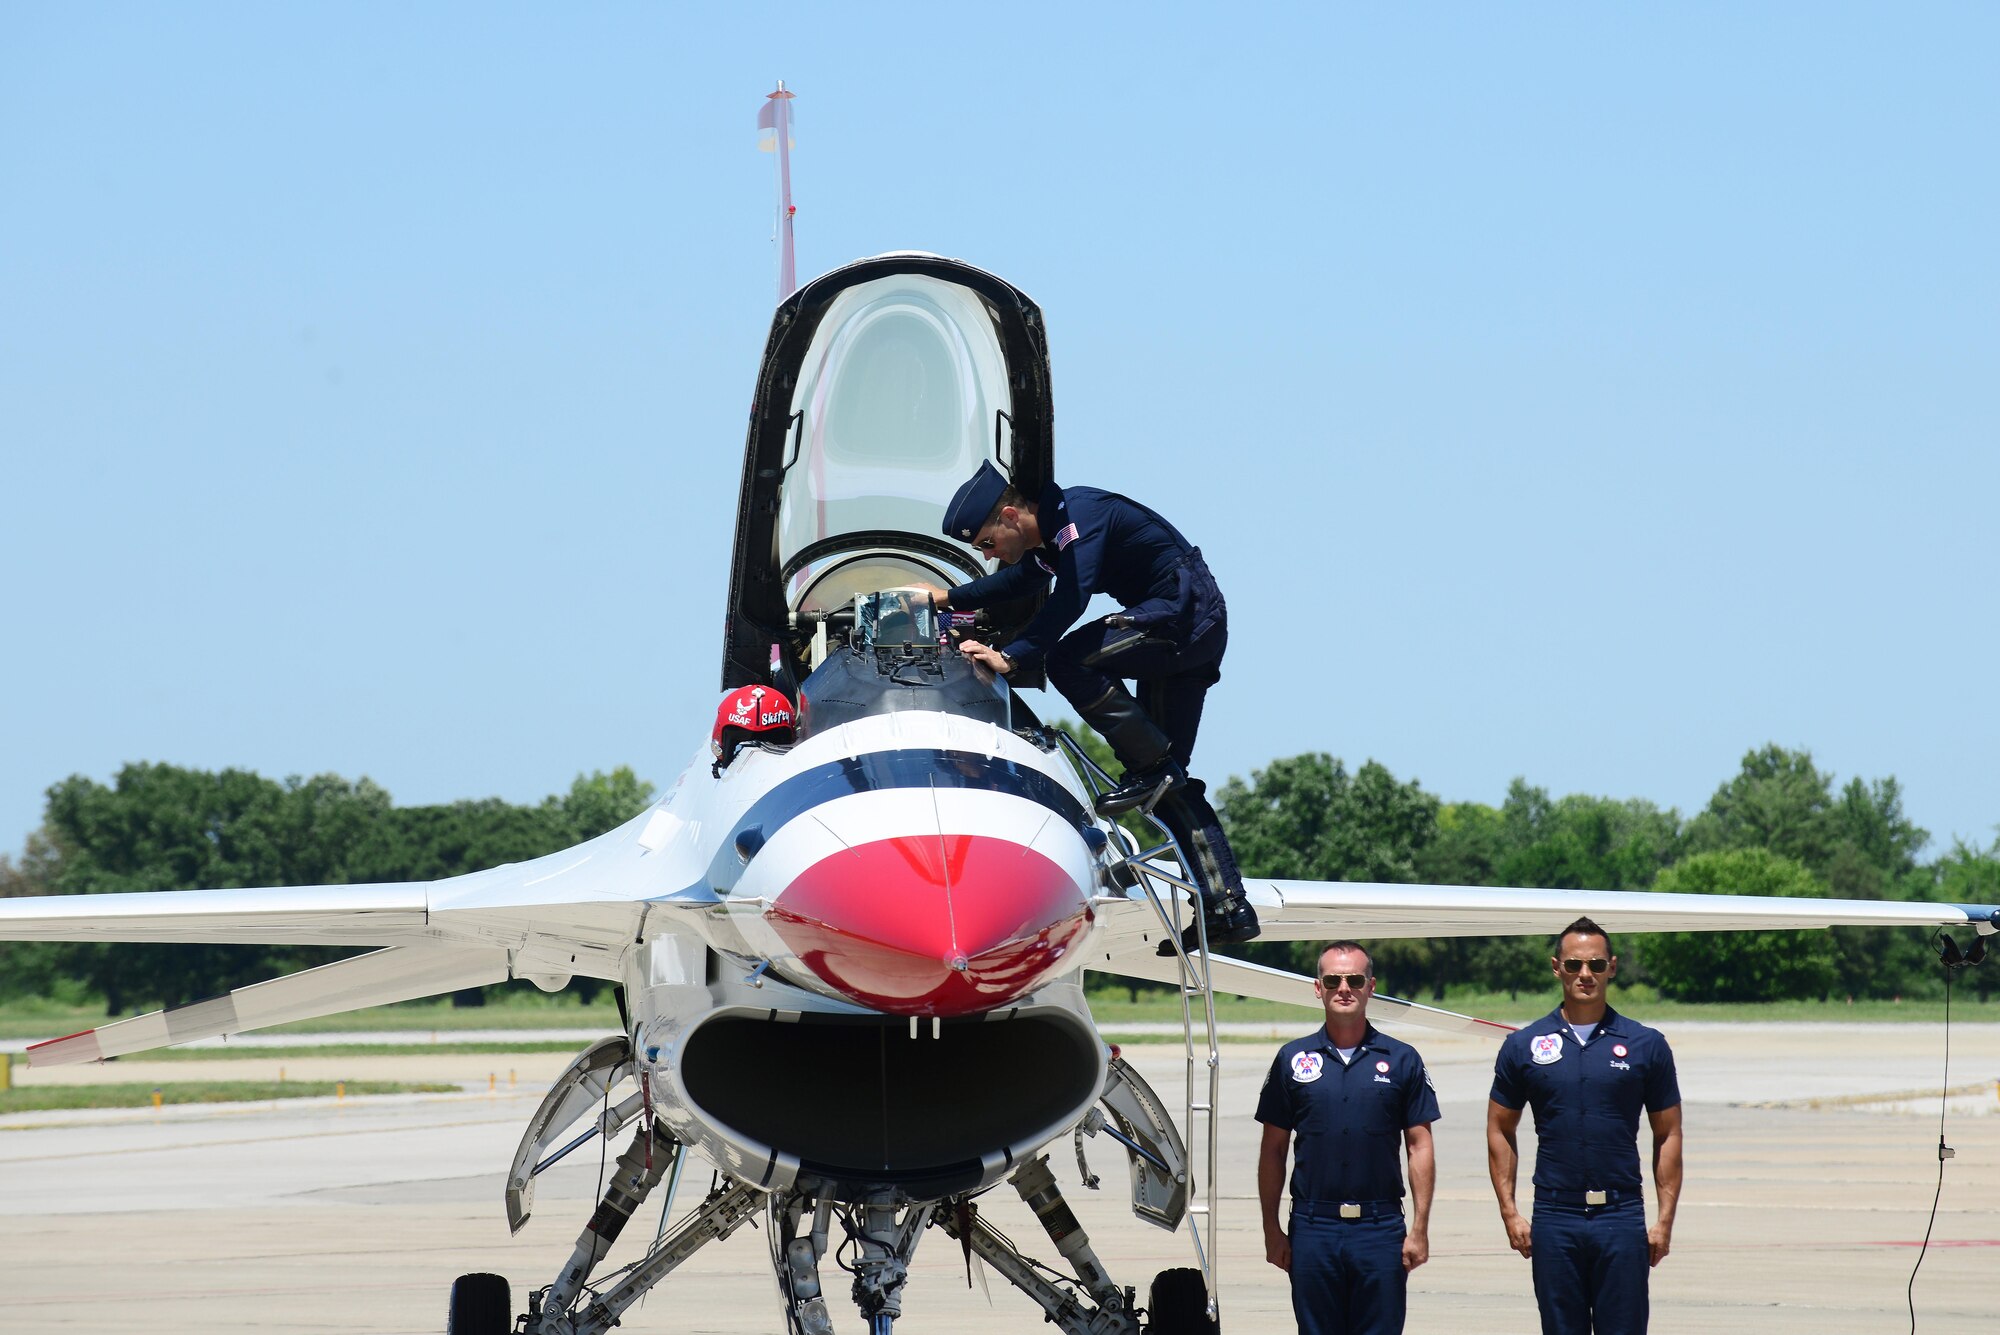 Lt. Col. Jason Heard, U.S. Air Force Air Demonstration pilot, gets into an F-16 during a pre-demonstration ground show at Scott Air Force Base June 9, 2017. Prior to joining the Thunderbirds, he led an F-15E squadron in combat as an expeditionary squadron commander. He has logged more than 3,000 flight hours with 788 hours of combat experience.  The Thunderbirds were headlining act of the base’s Centennial Air Show.   (U.S. Air Force photo by Tech. Sgt. Maria Castle)